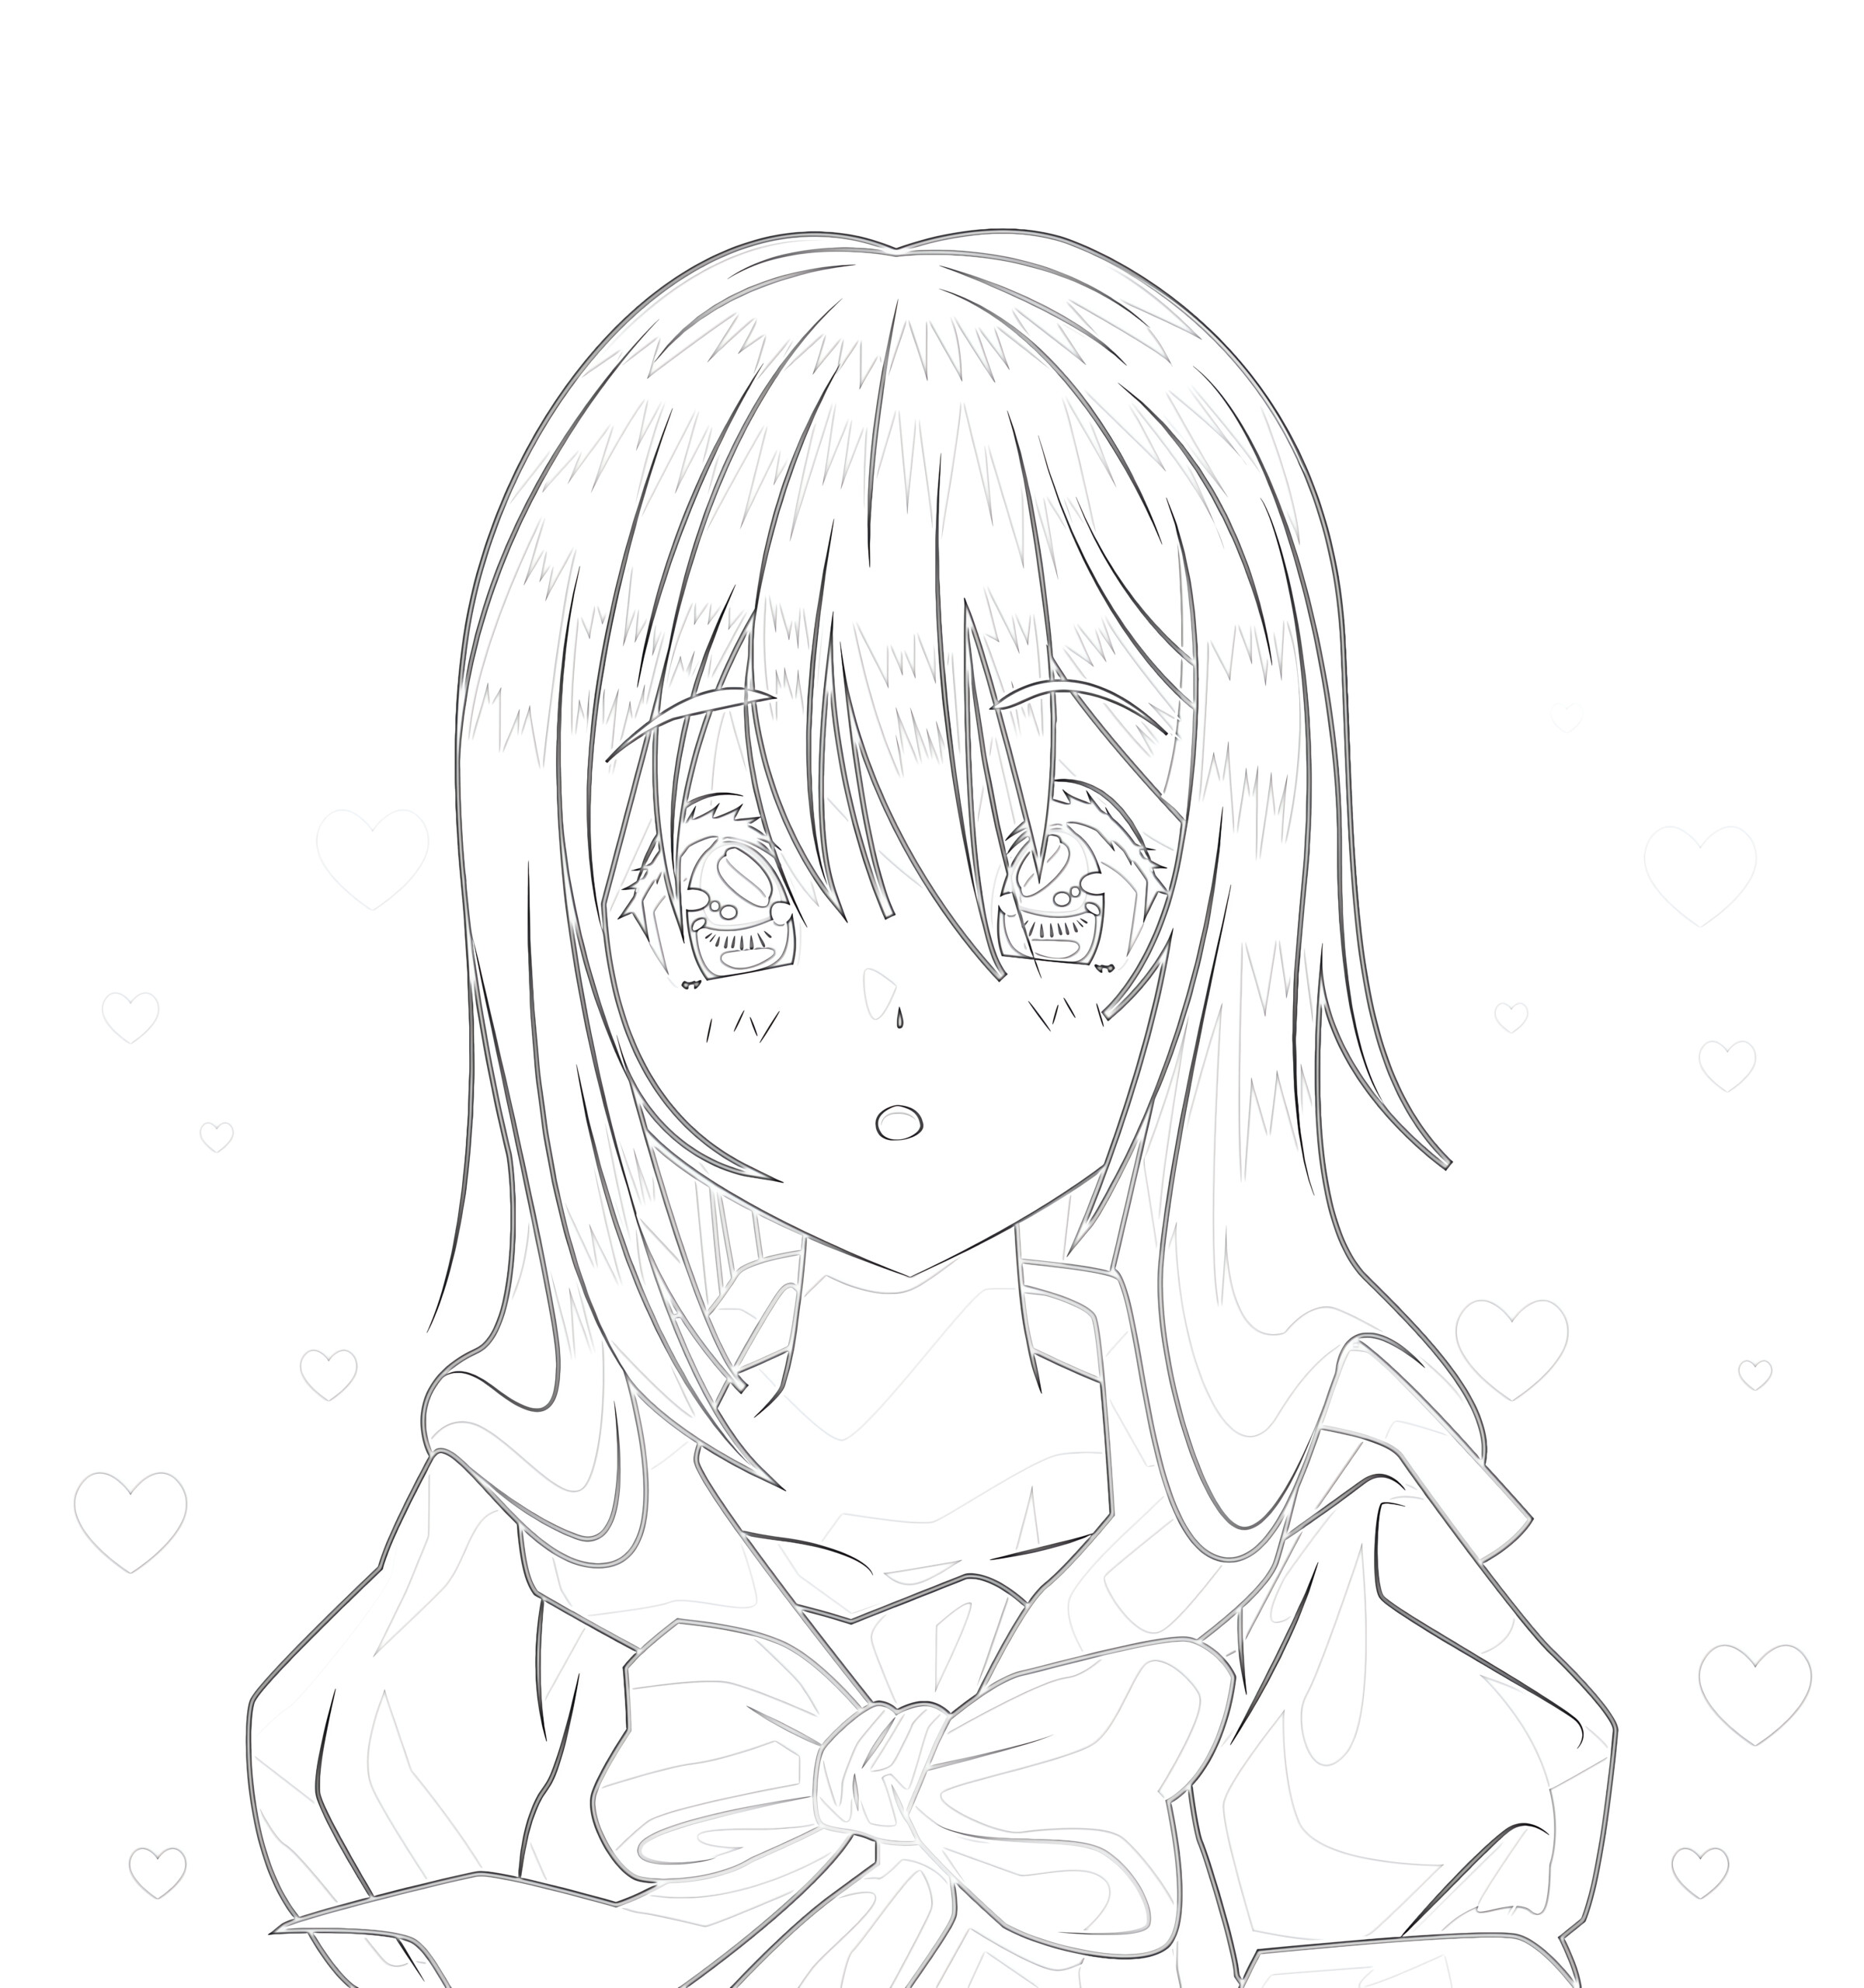 Young Woman Anime Style Character - Coloring page